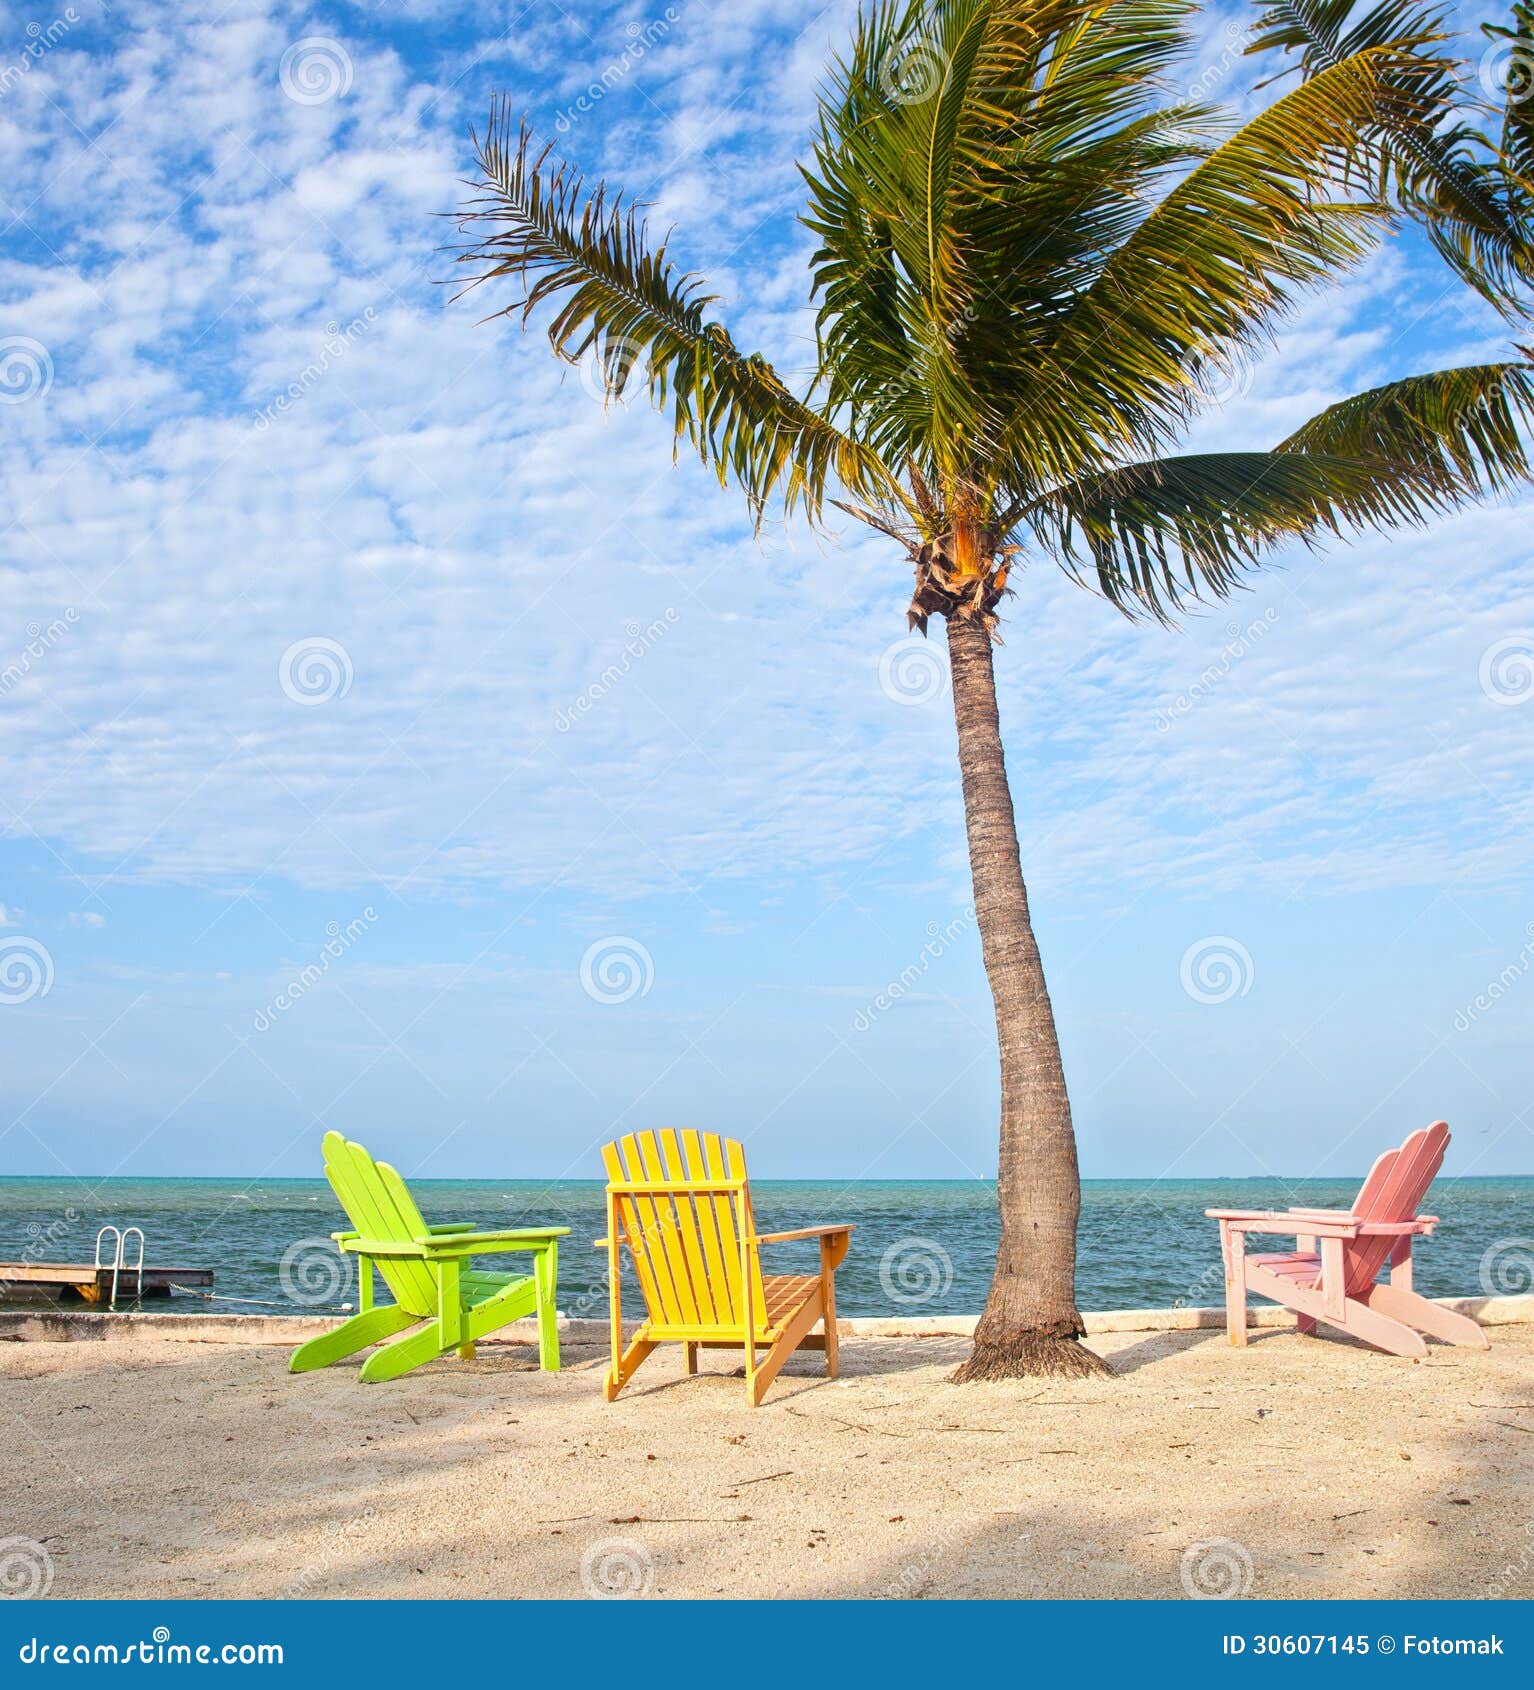 Beach Scene With Palm Tree And Chairs